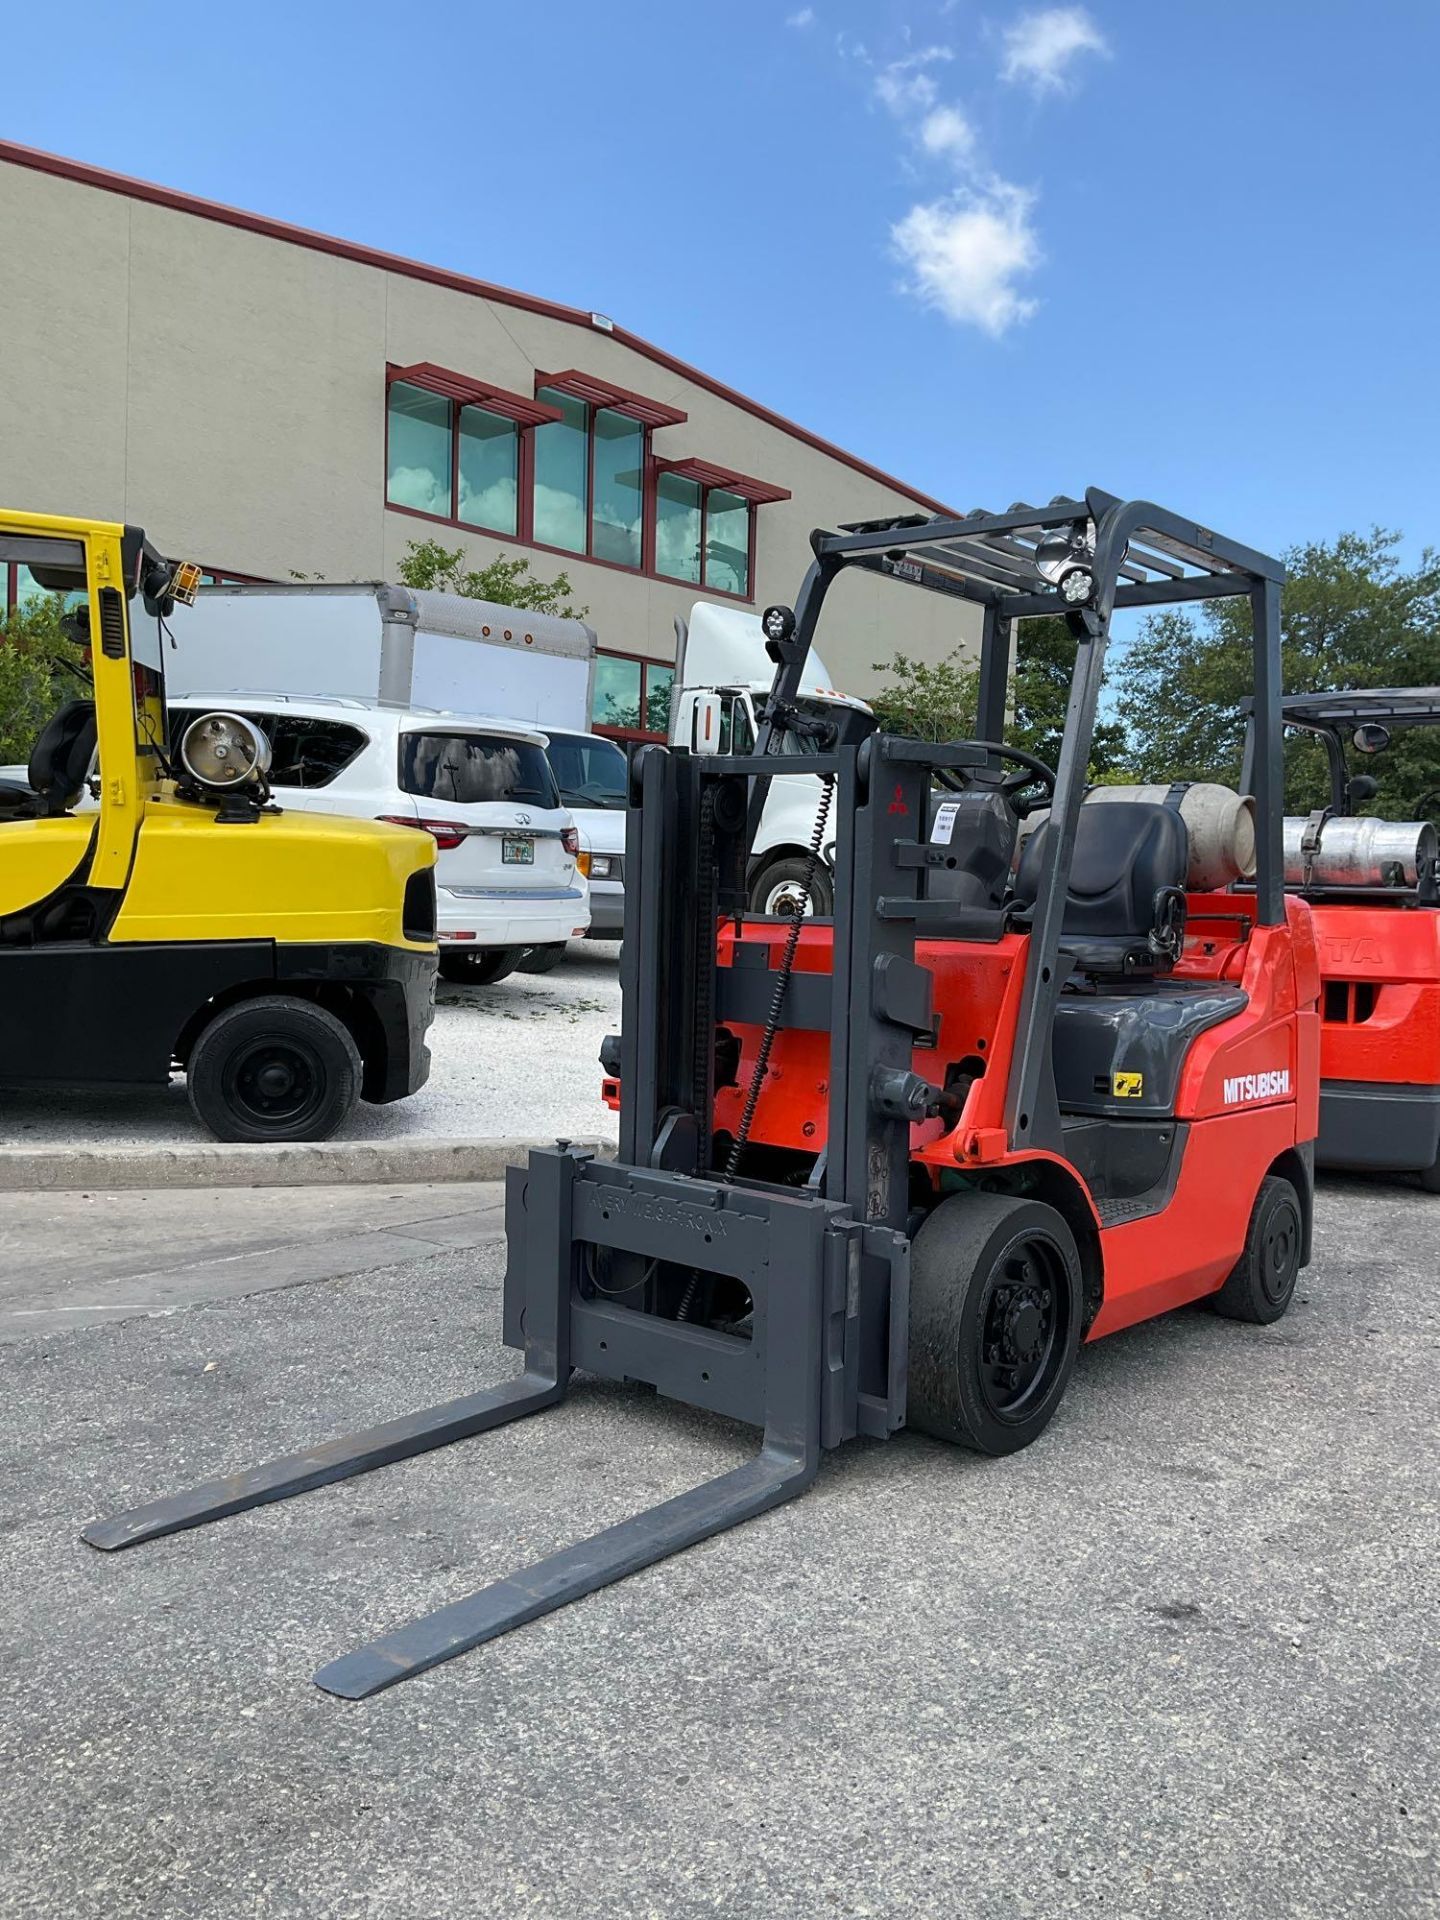 MITSUBISHI FORKLIFT MODEL FGC25N-LP, LP POWERED, APPROX MAX CAPACITY 5000LBS - Image 7 of 13